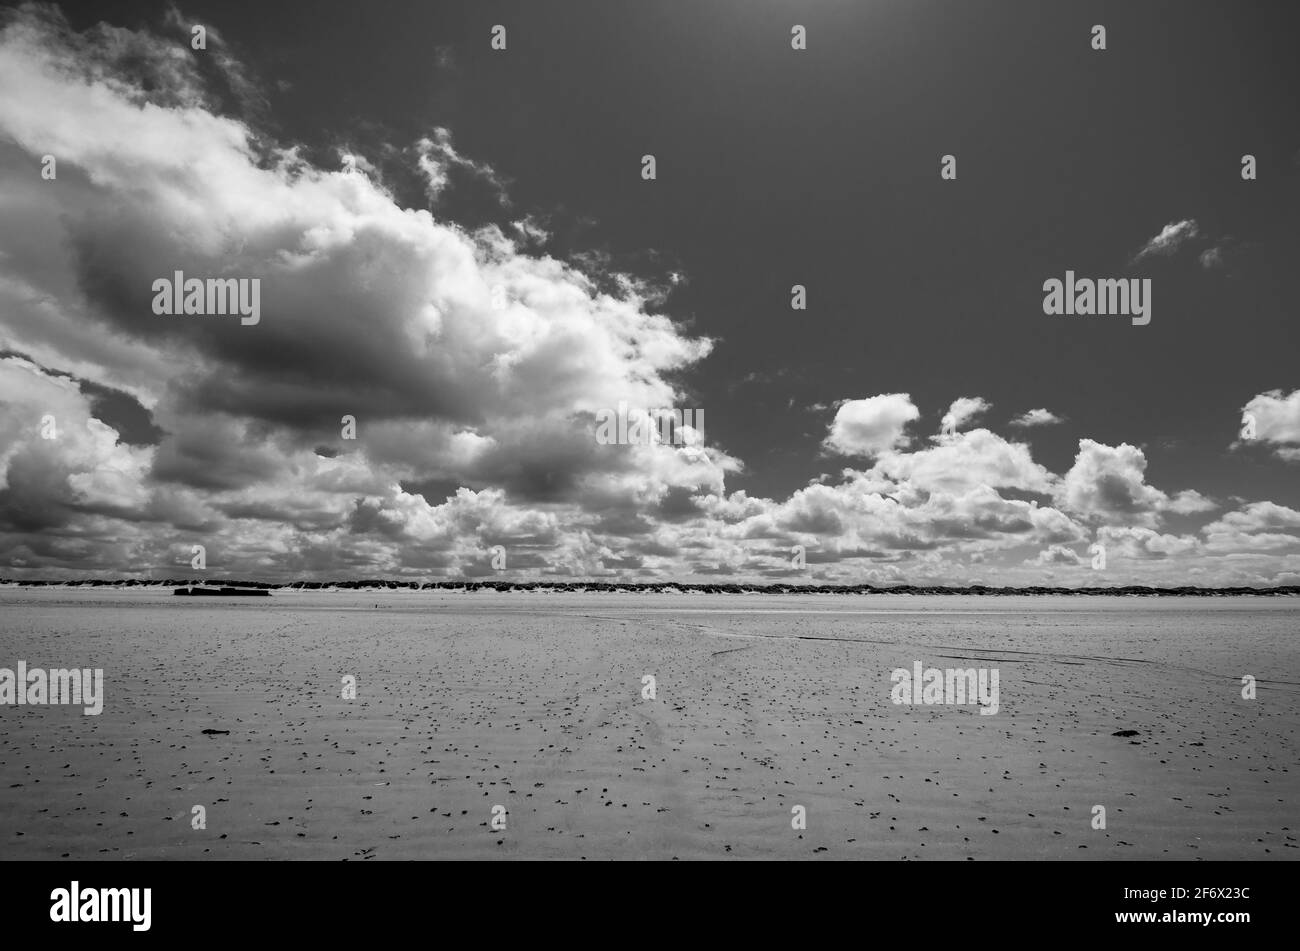 Sand, sky, clouds on the beach at low tide near Brancaster / RSPB Titchwell Marsh, Norfolk, UK. B&W Stock Photo